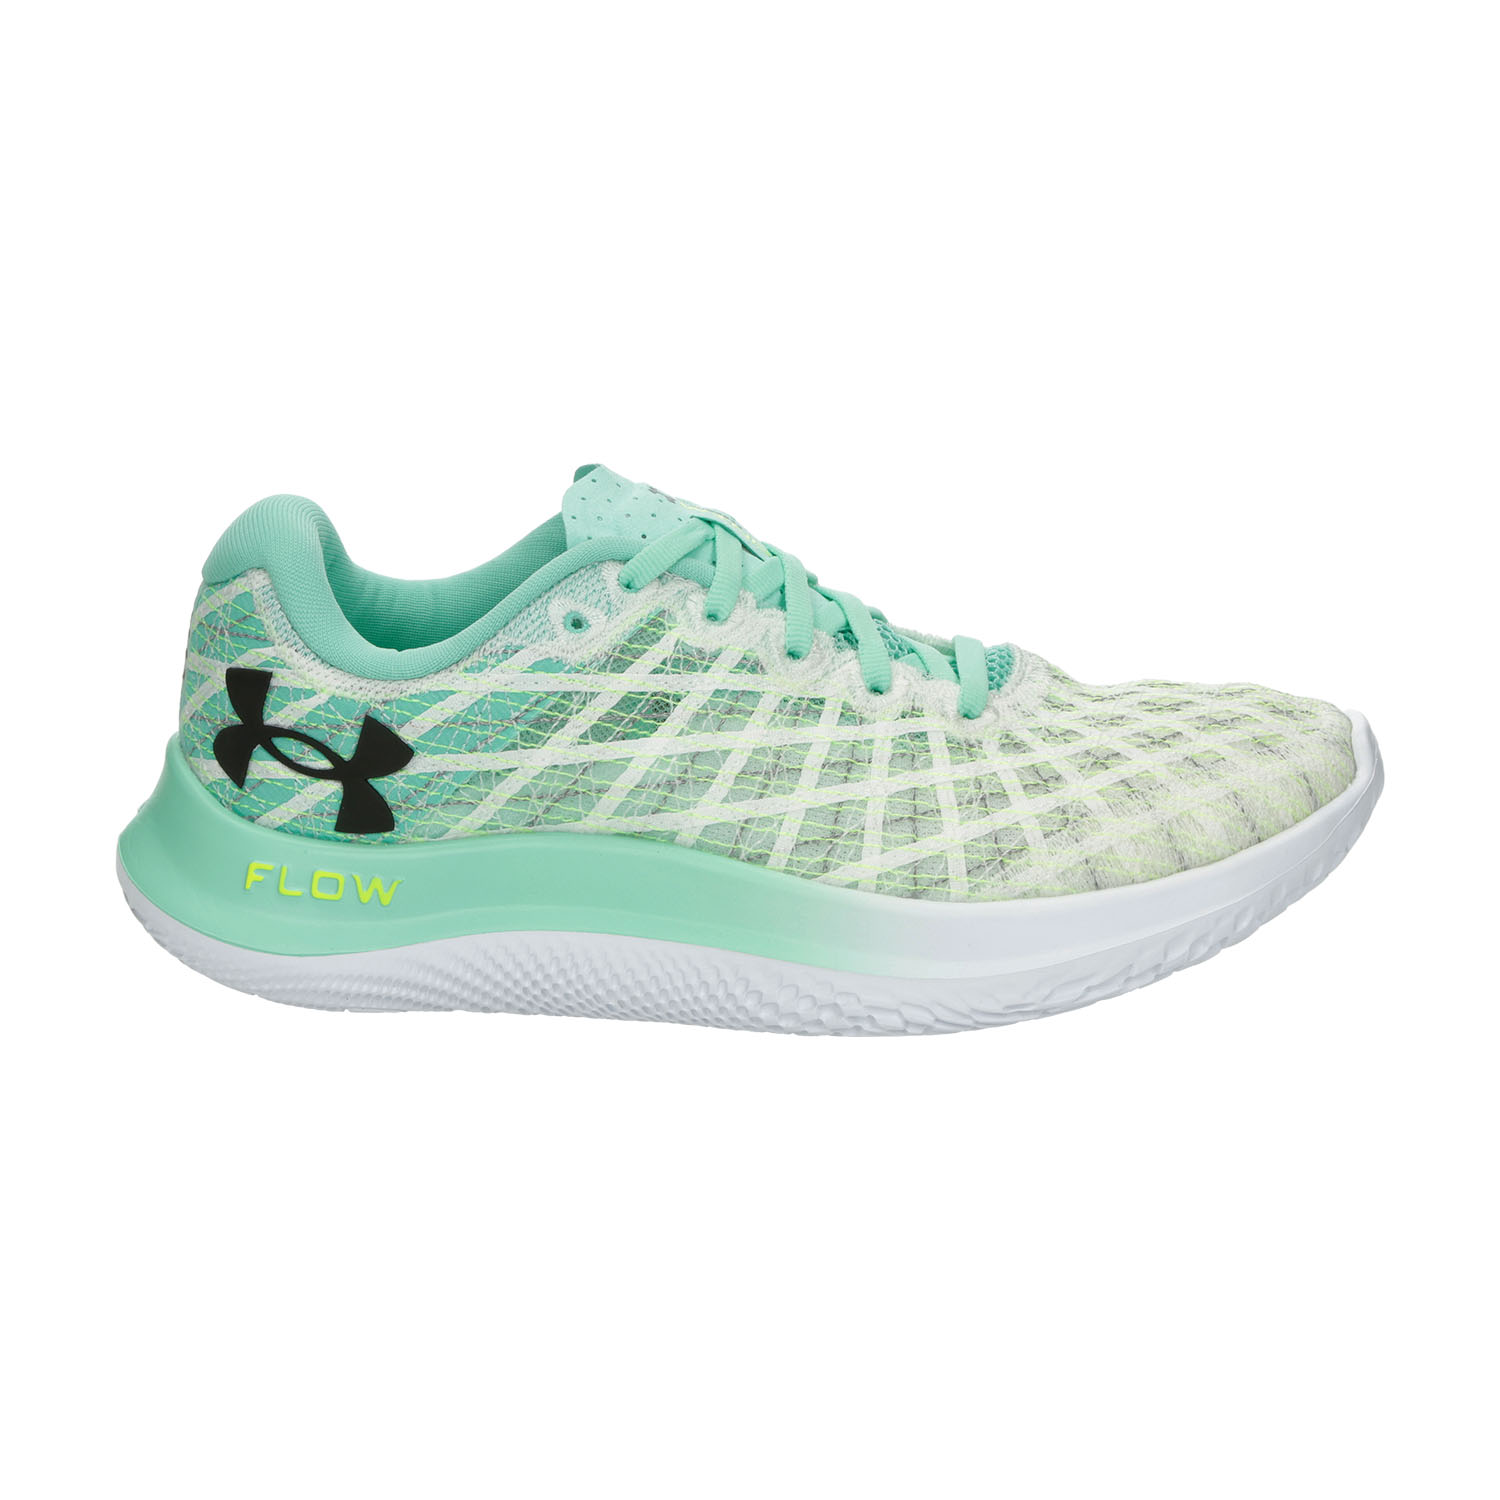 Under Armour Flow Velociti Wind 2 Women's Running Shoes - White